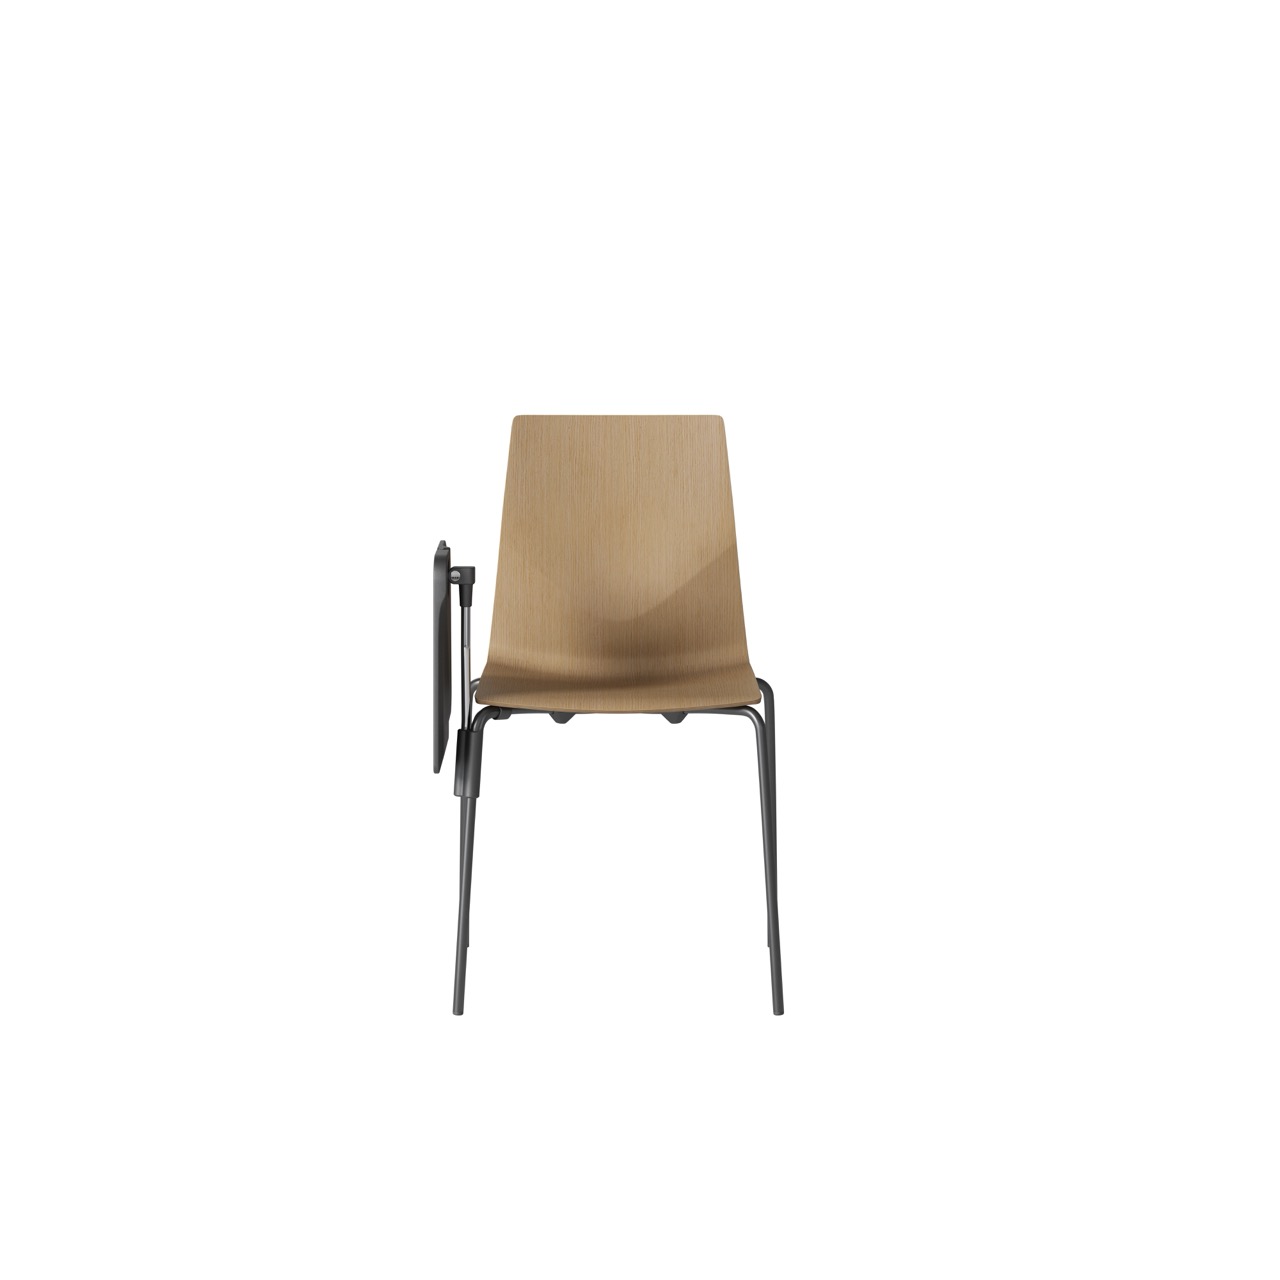 OCEE&FOUR – Chairs – FourCast 2 Four – Veneer shell - Inno Note - Nested - Packshot Image 2 Large